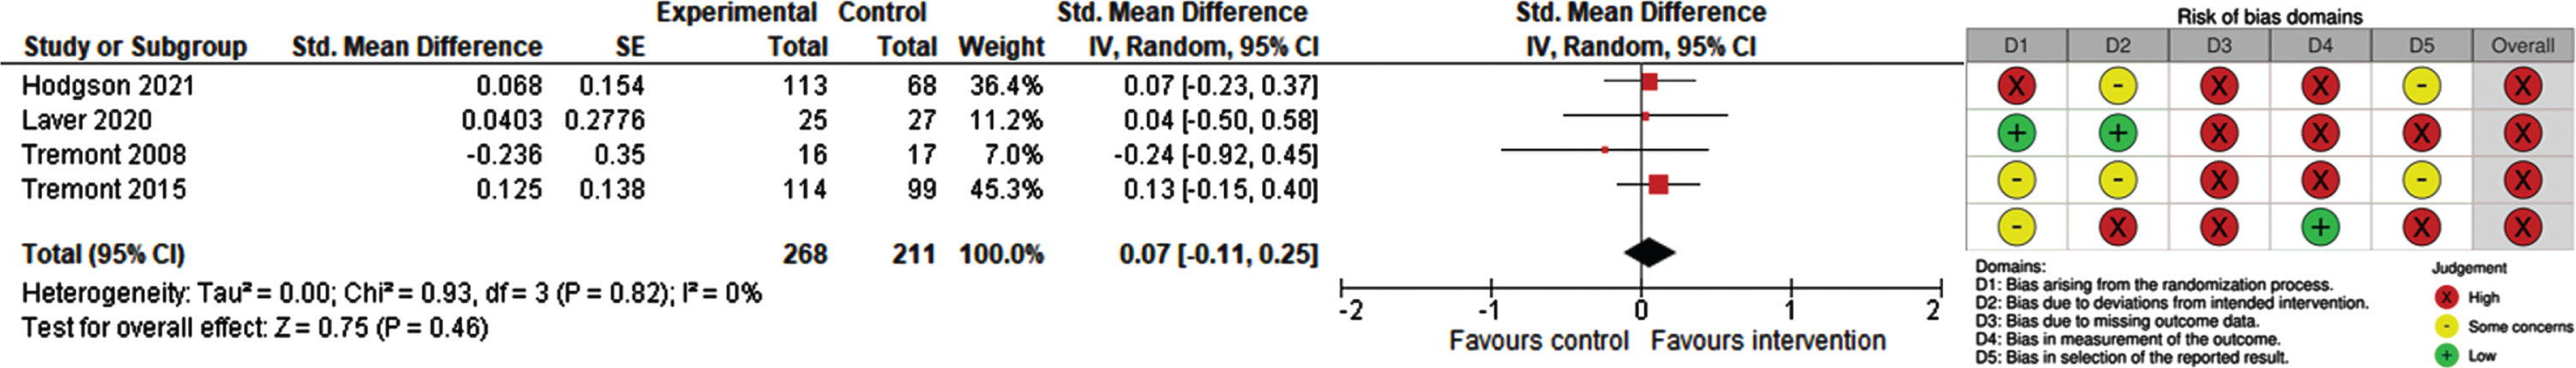 Forest Plot and RoB 2 for self-efficacy/mastery experienced by carers of people with dementia.